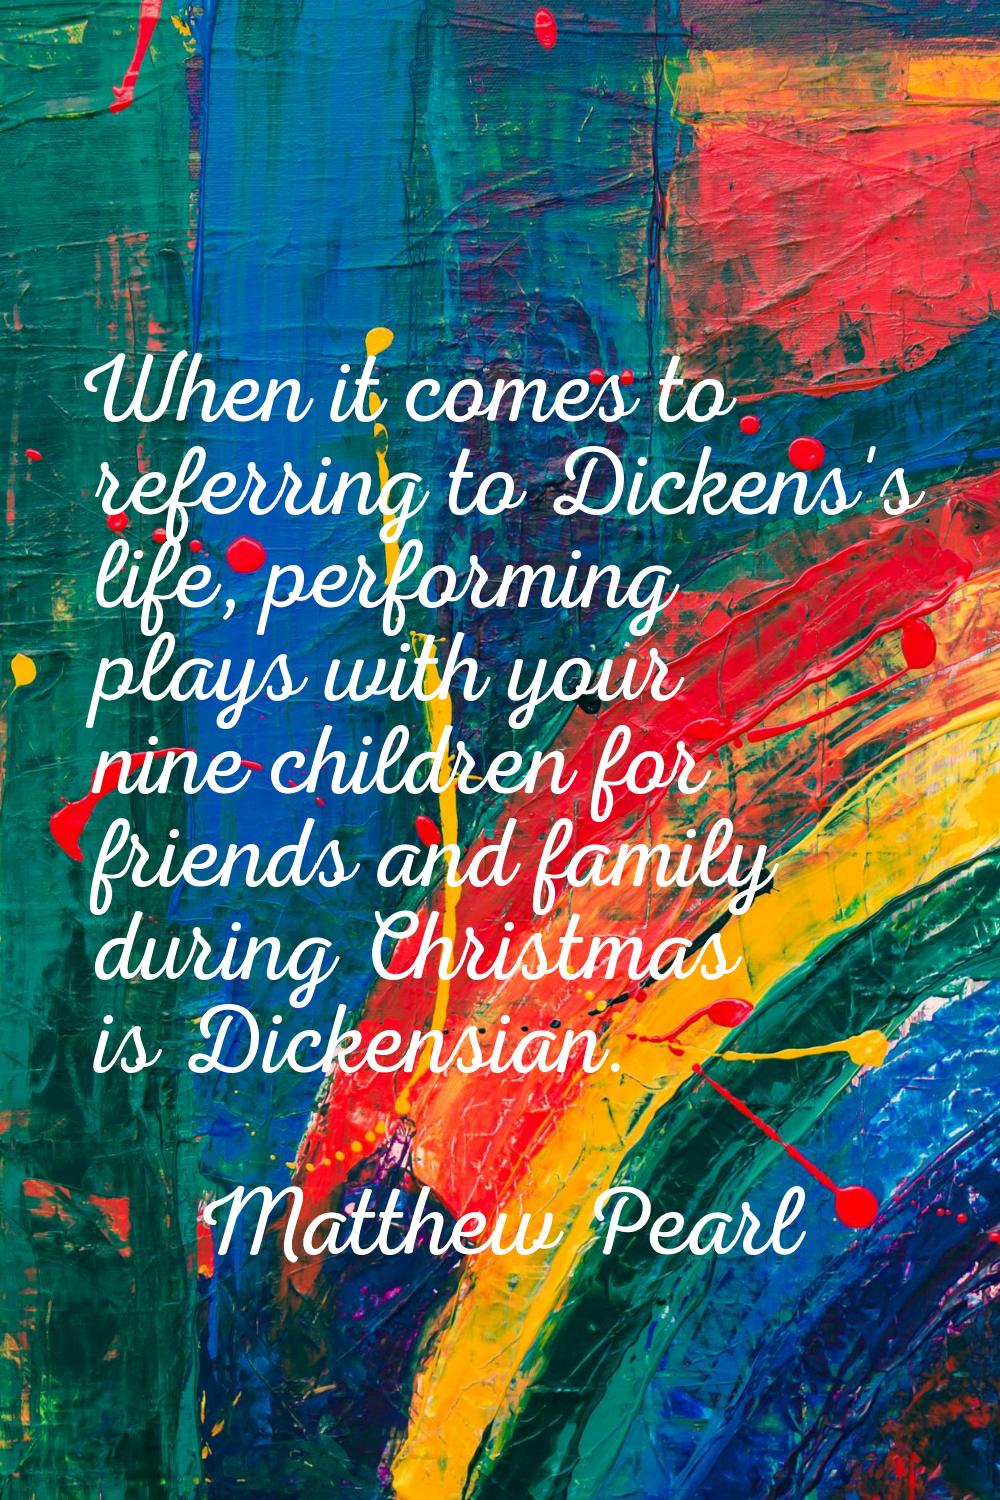 When it comes to referring to Dickens's life, performing plays with your nine children for friends 